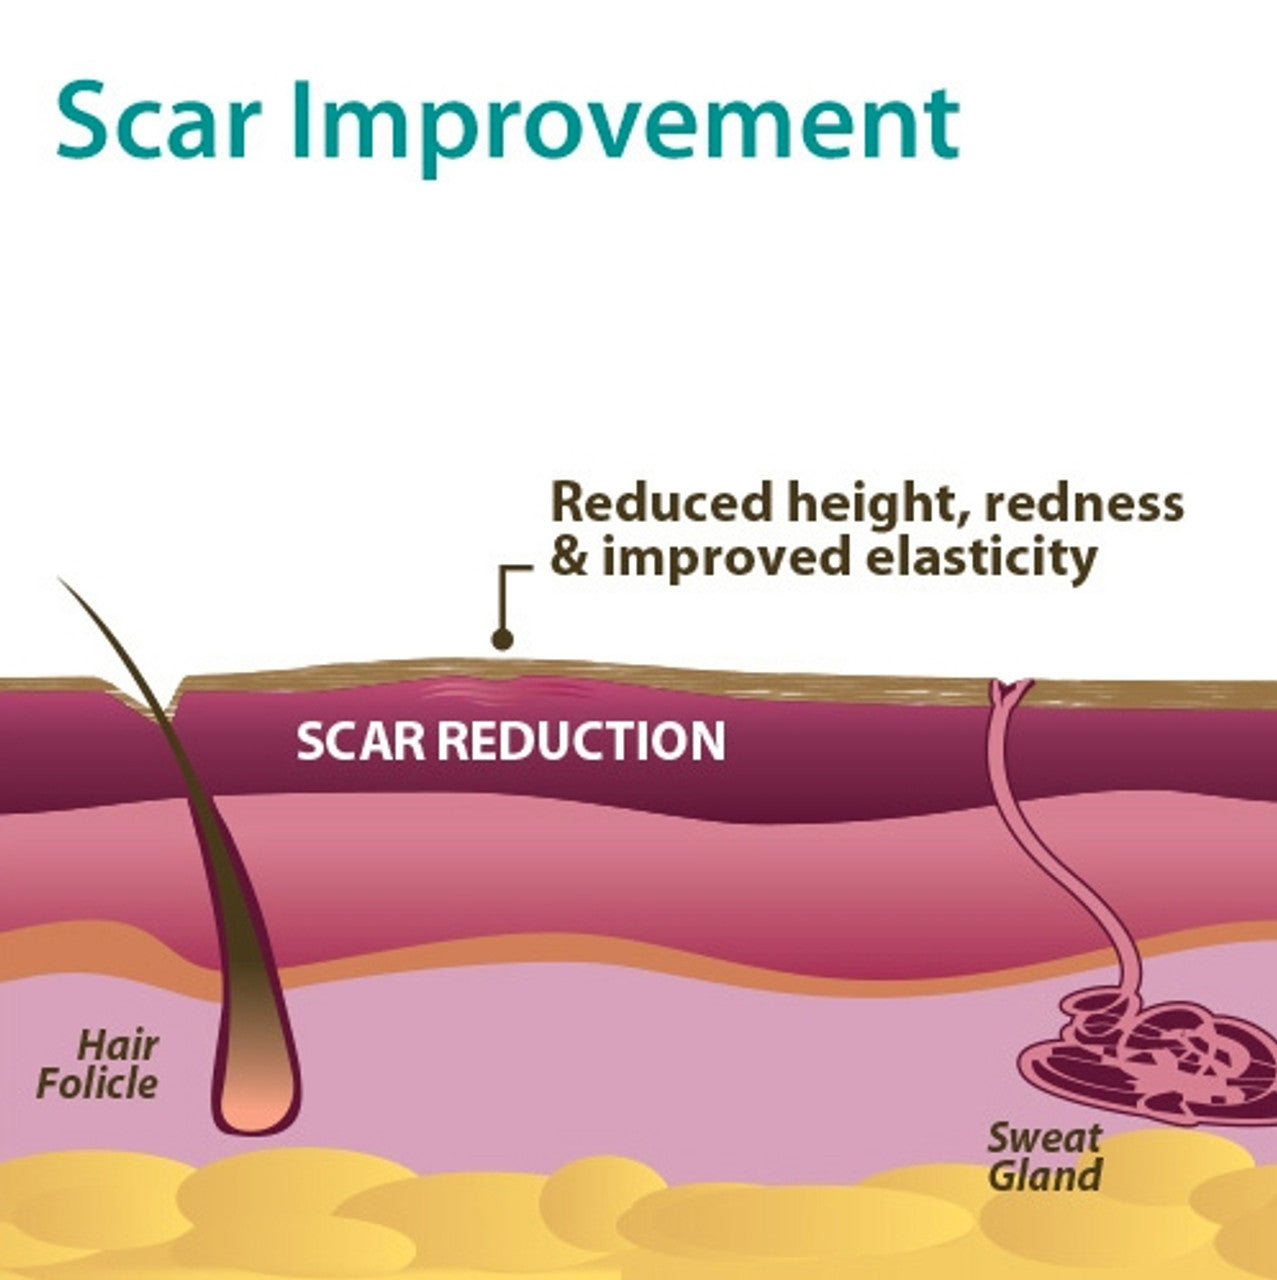 Graphic of how silicone improves scars